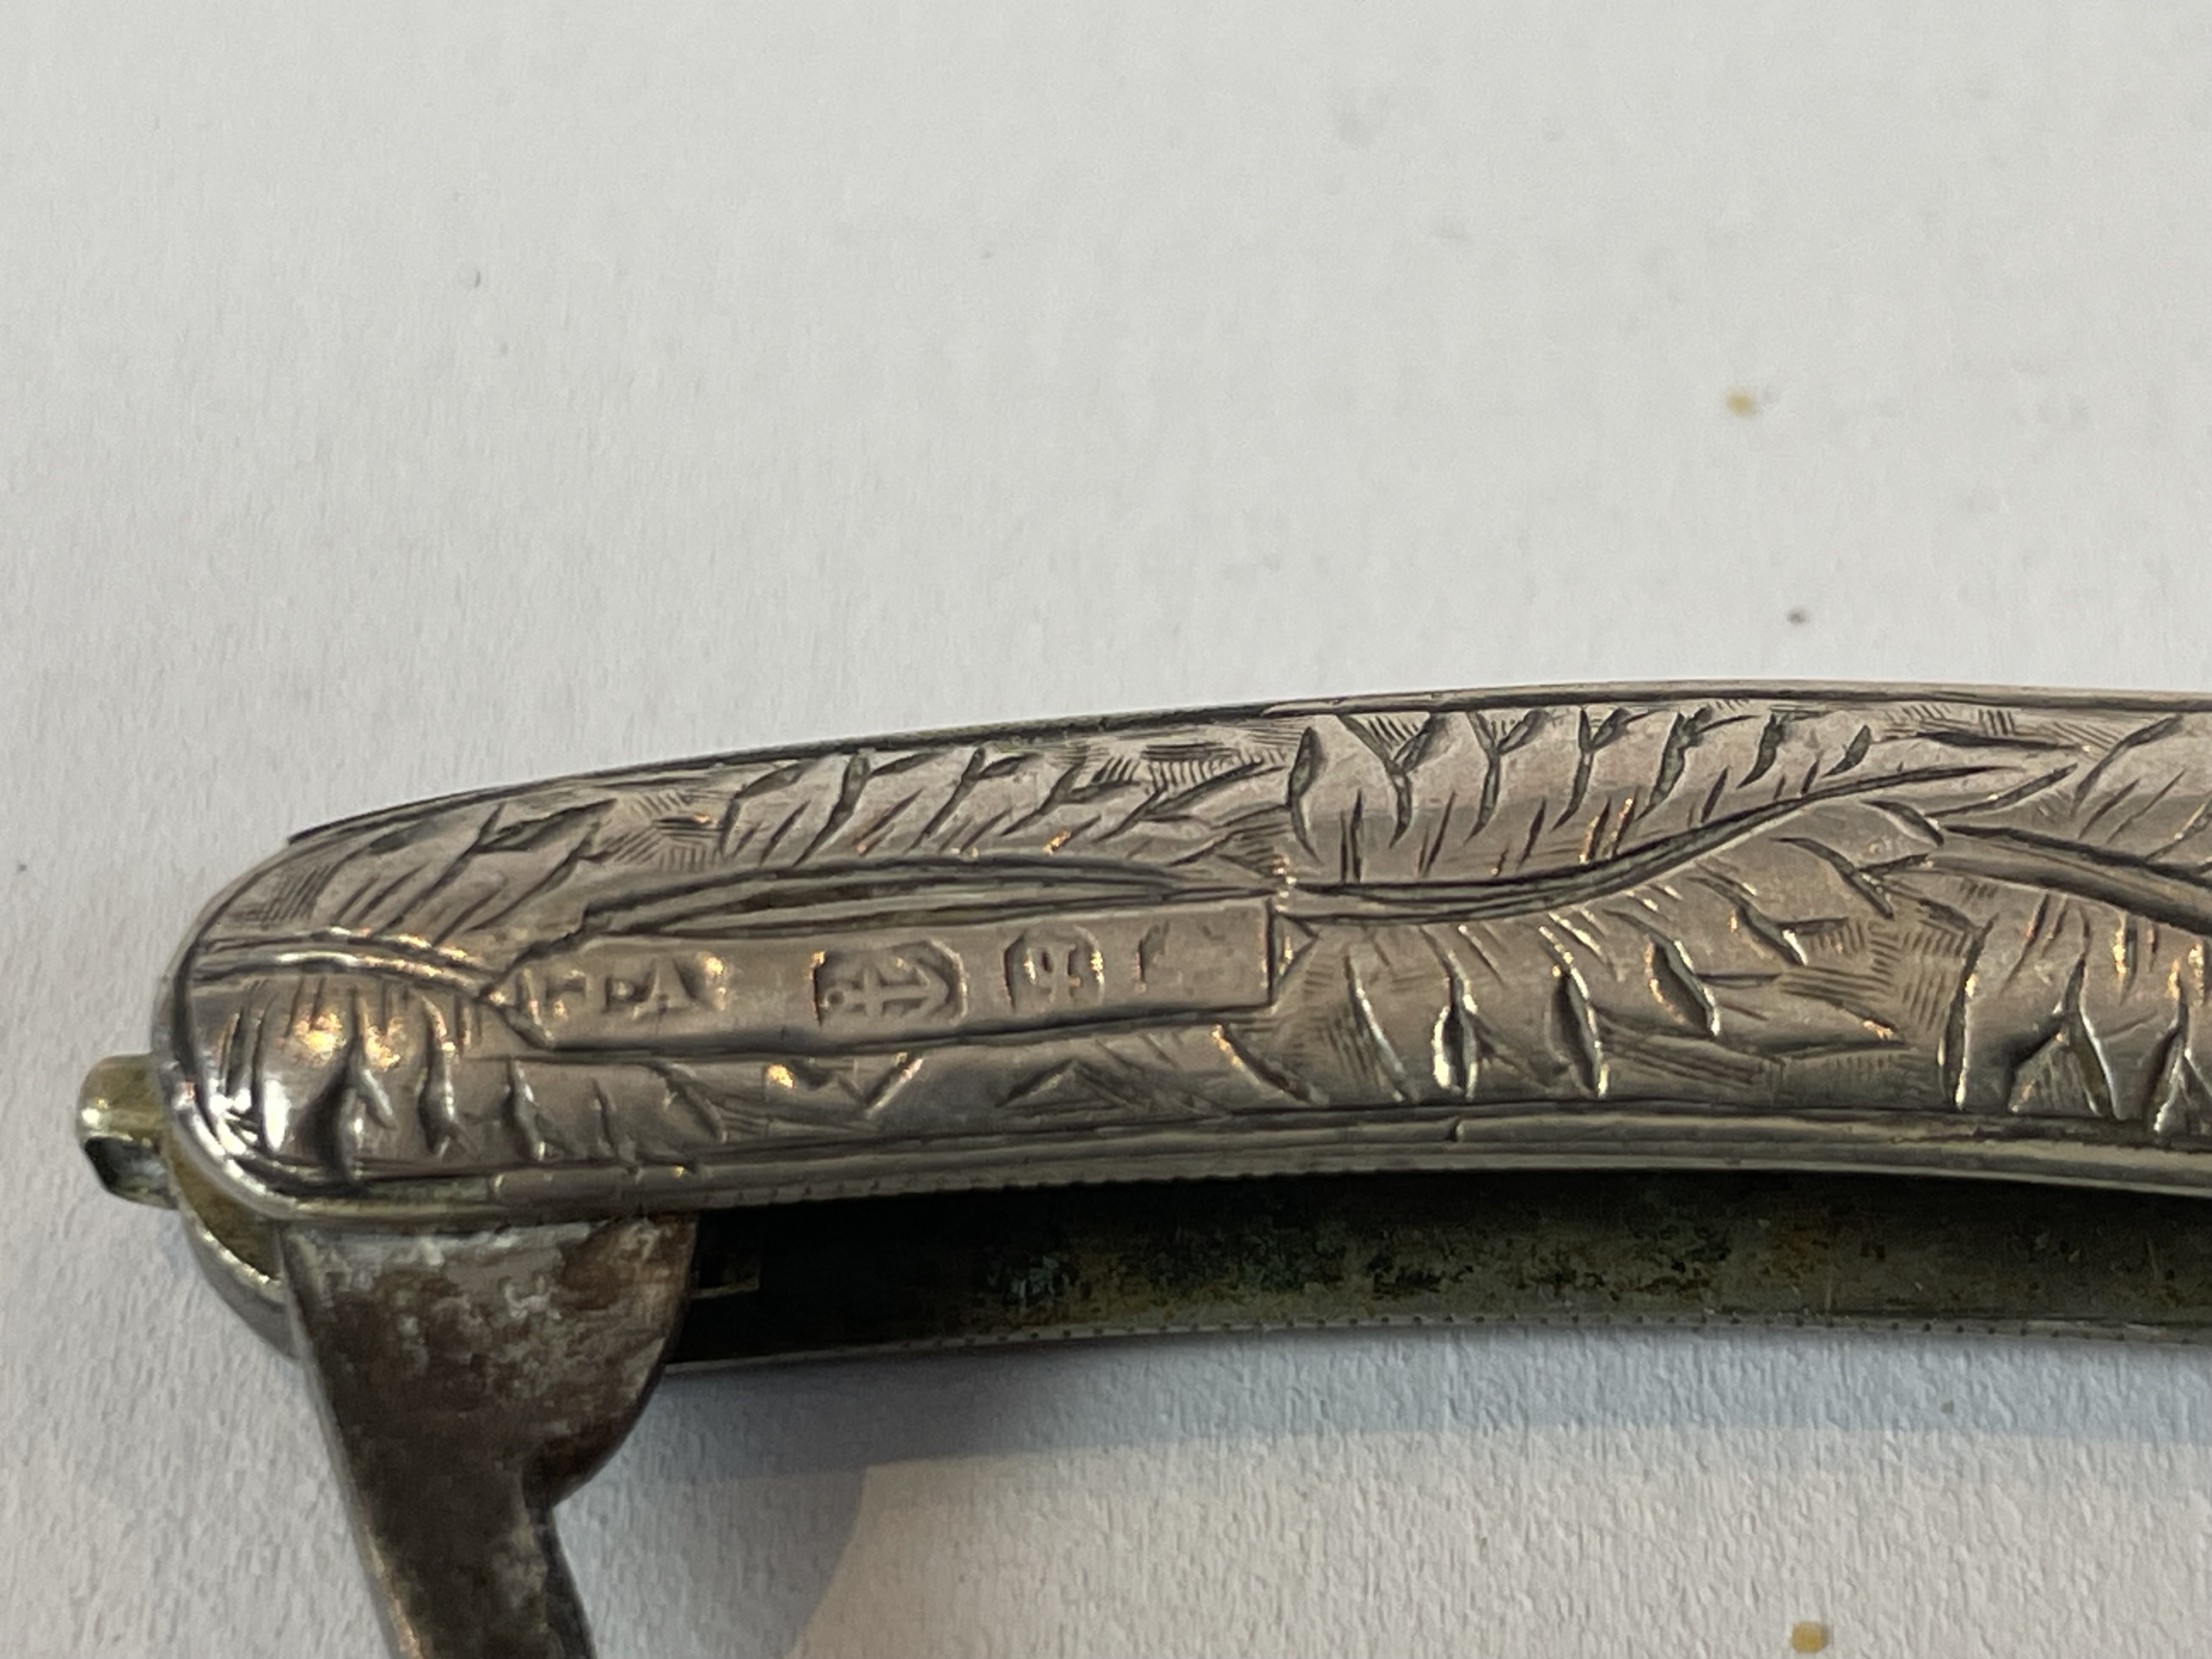 Silver penknife by James Alexander dated 1890 - Image 2 of 2